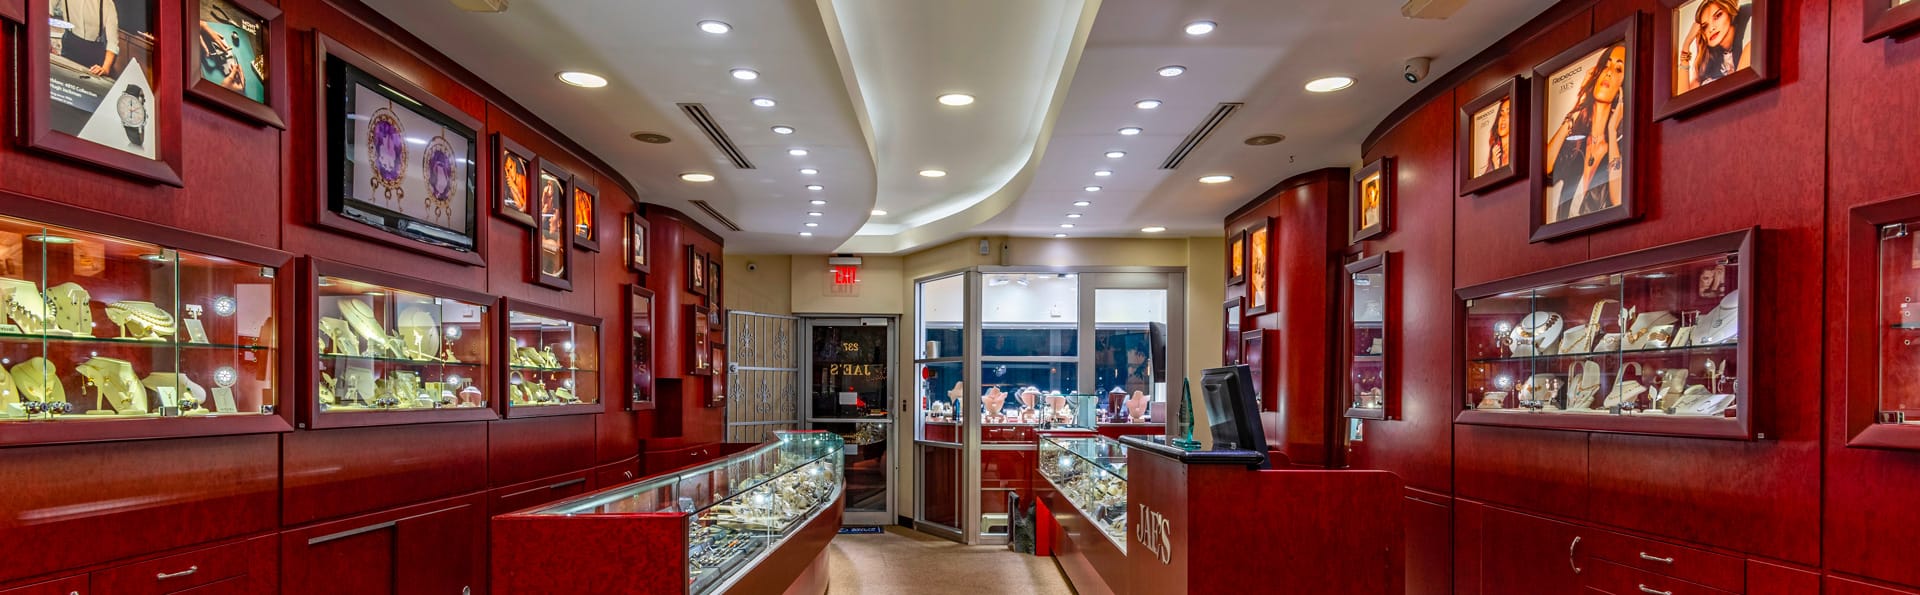 Jewelry Repair Stores  Jewelry Repair in Miami and Coral Gables